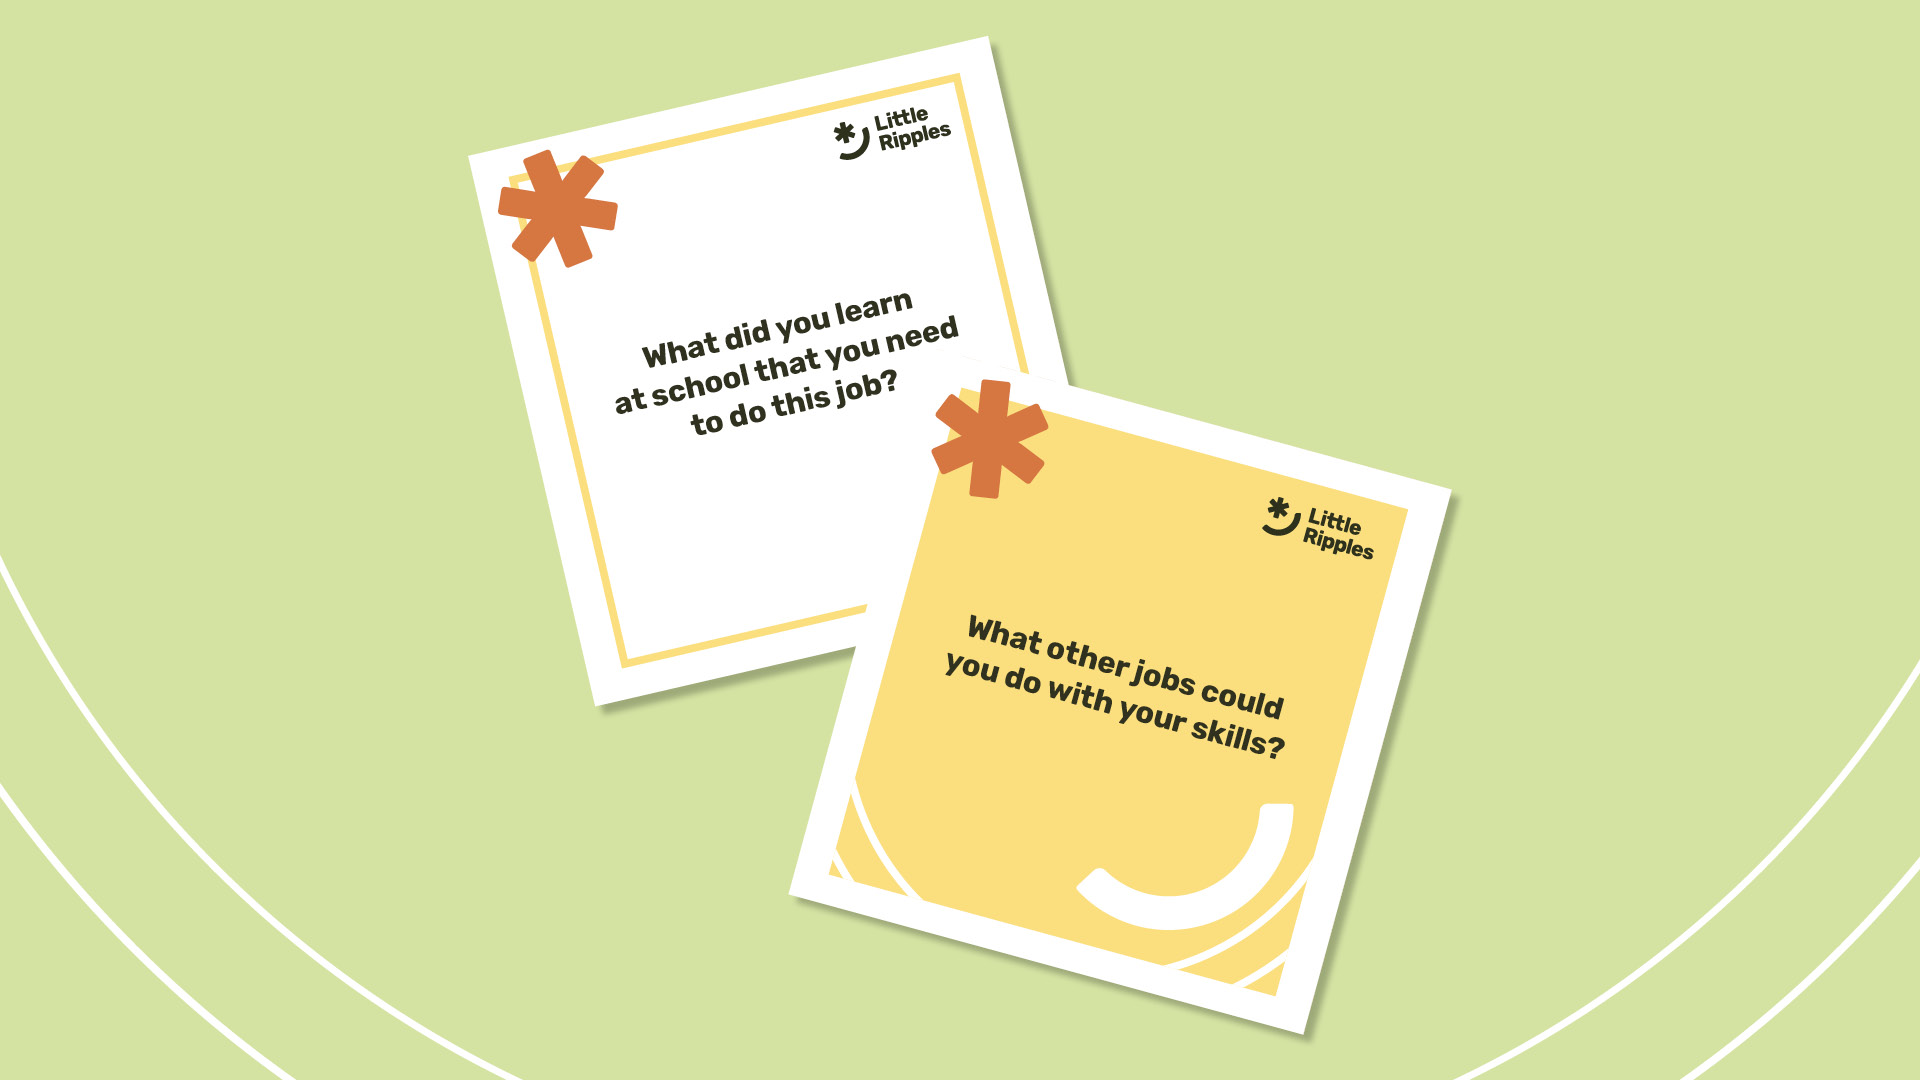 Two cards with text: "What did you learn at school that you need to do this job?" and "What other jobs could you do with your skills"